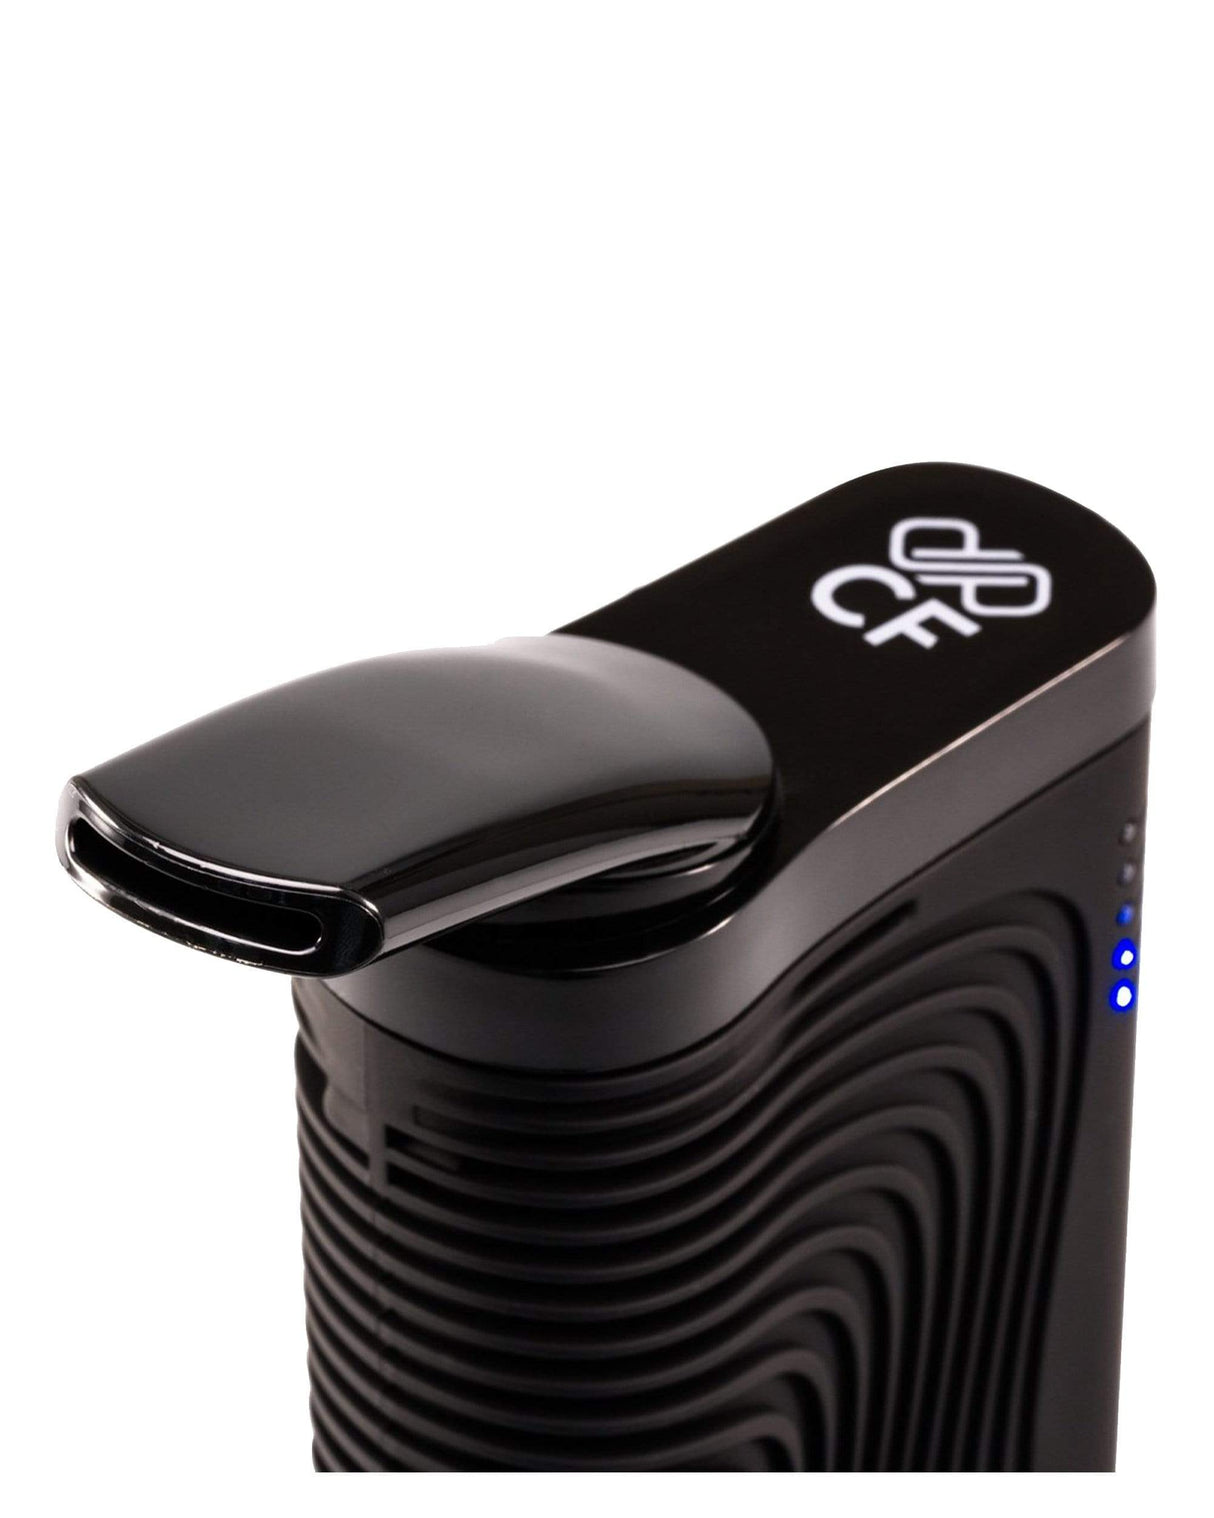 Boundless CF Vaporizer in black, compact design, side view showing ceramic chamber